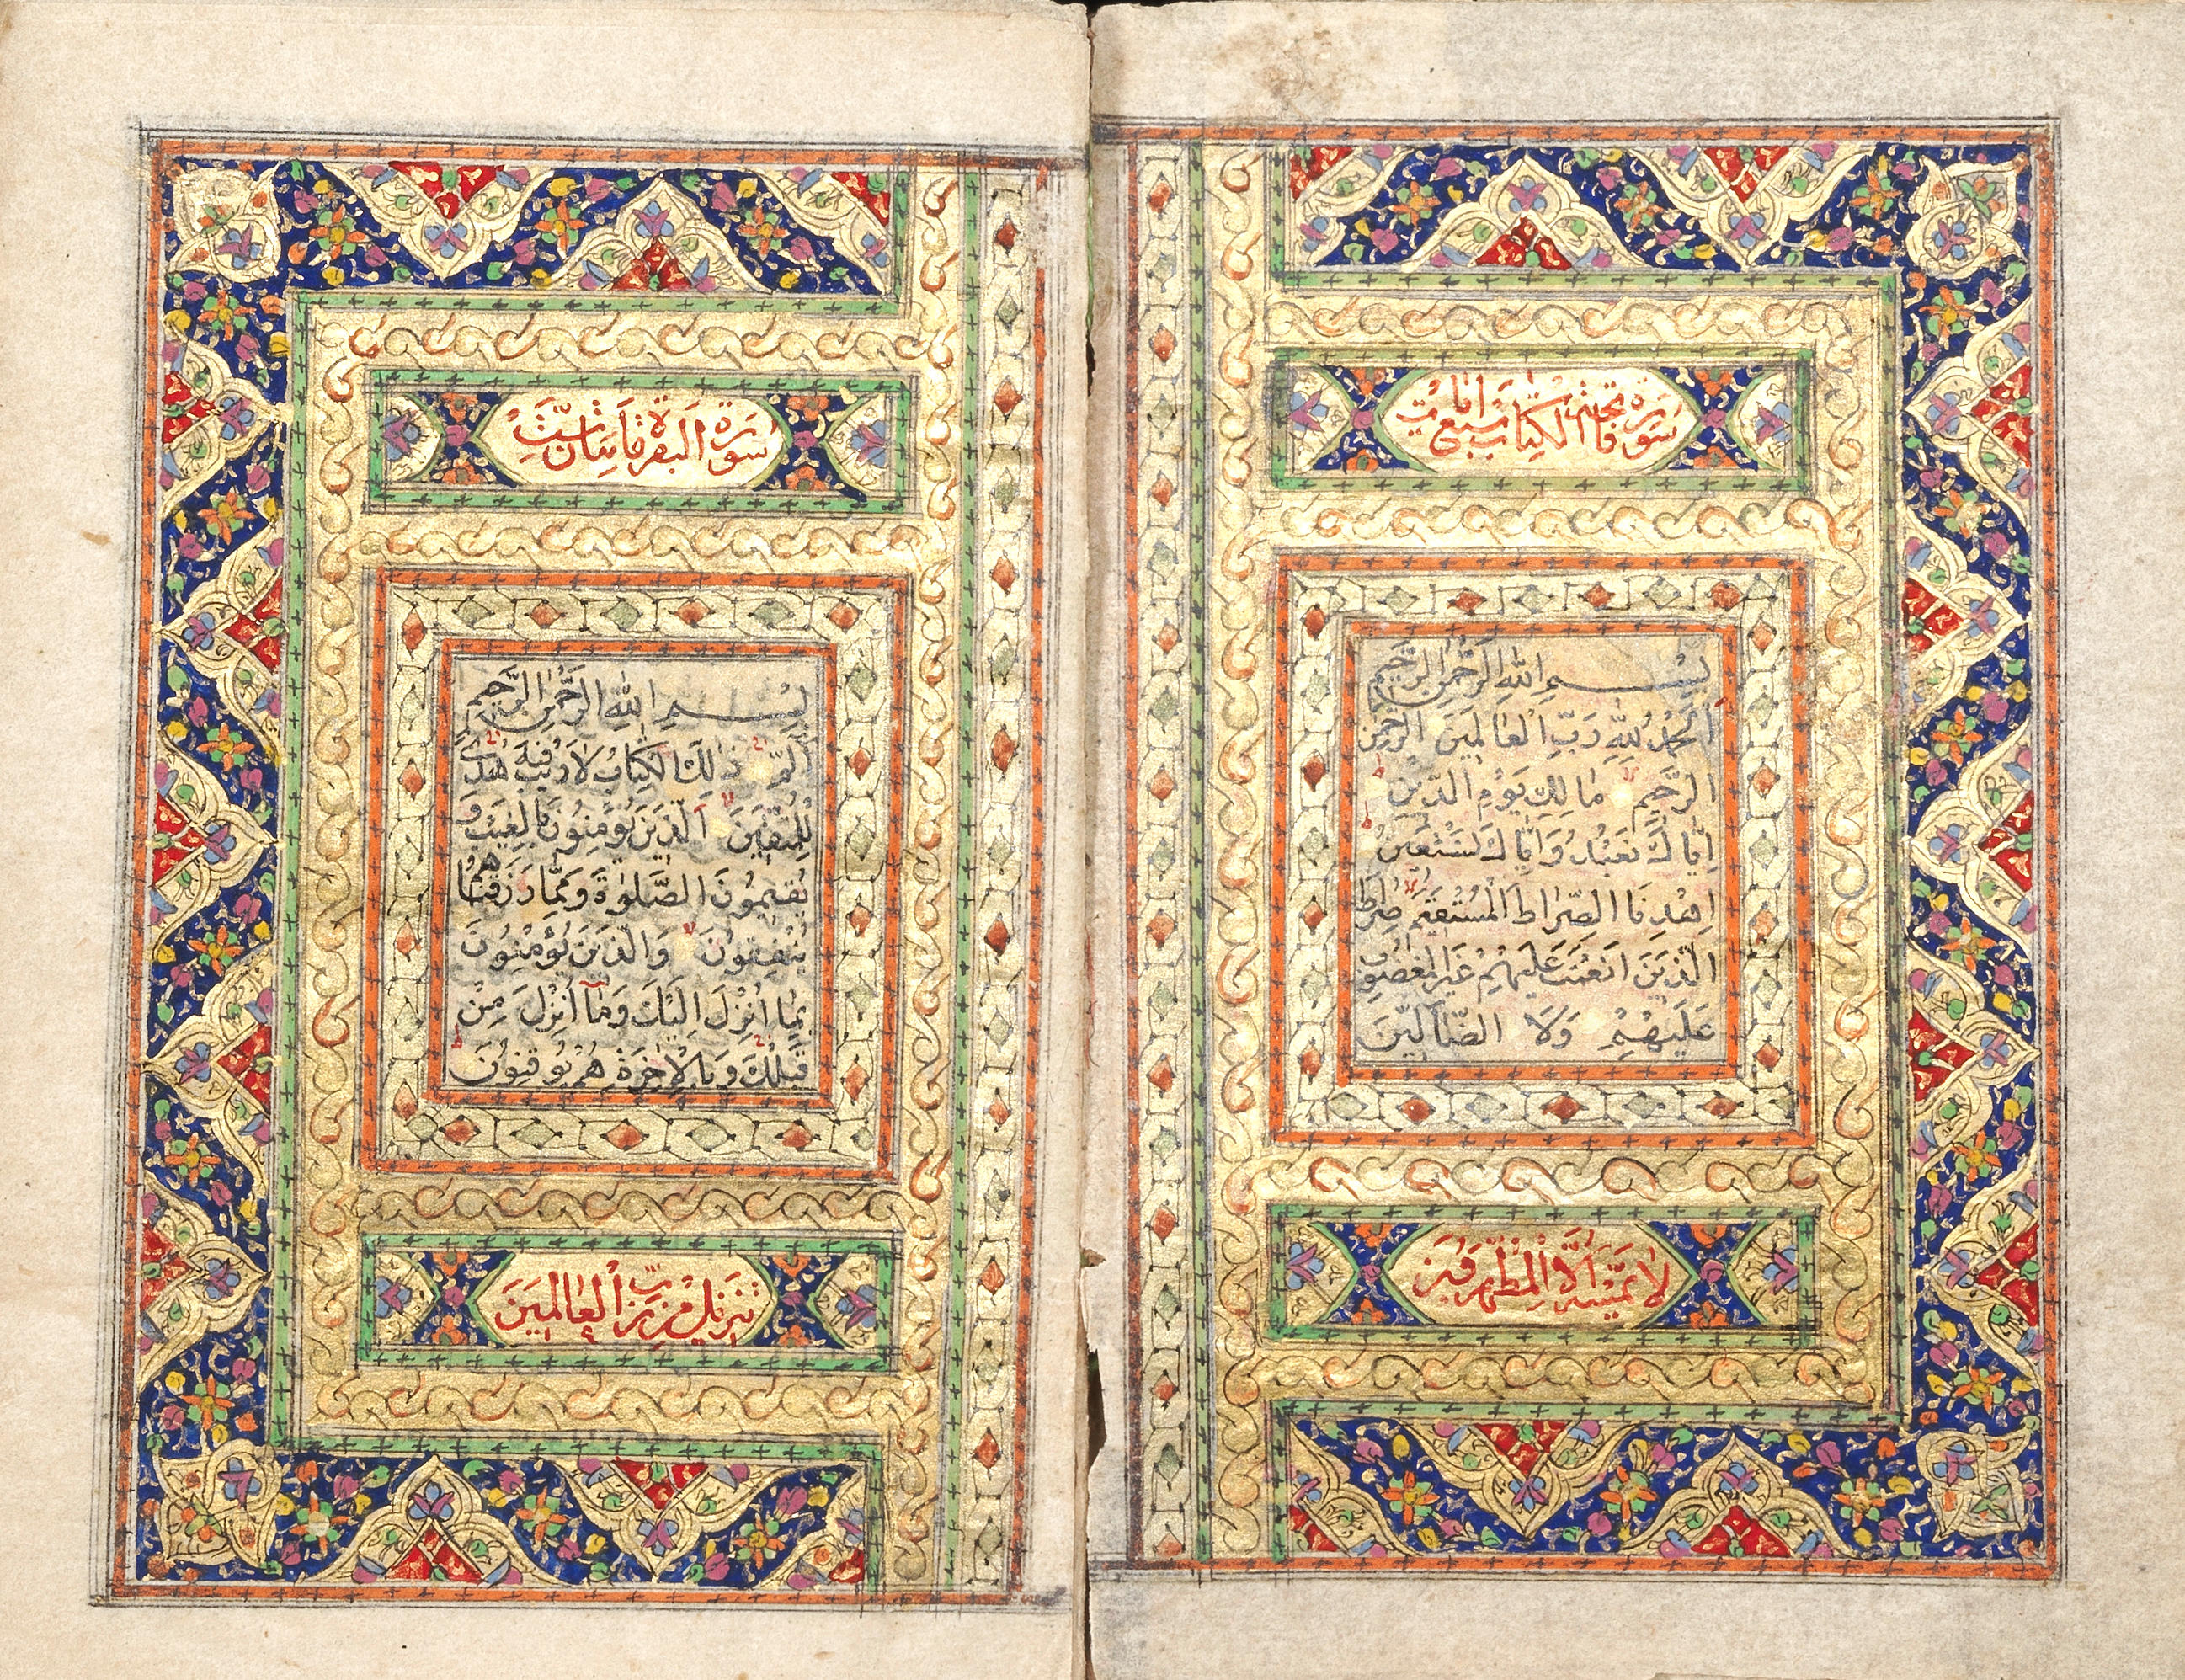 Bonhams A Small Illuminated Qur An On Gold Sprinkled Thin Paper In